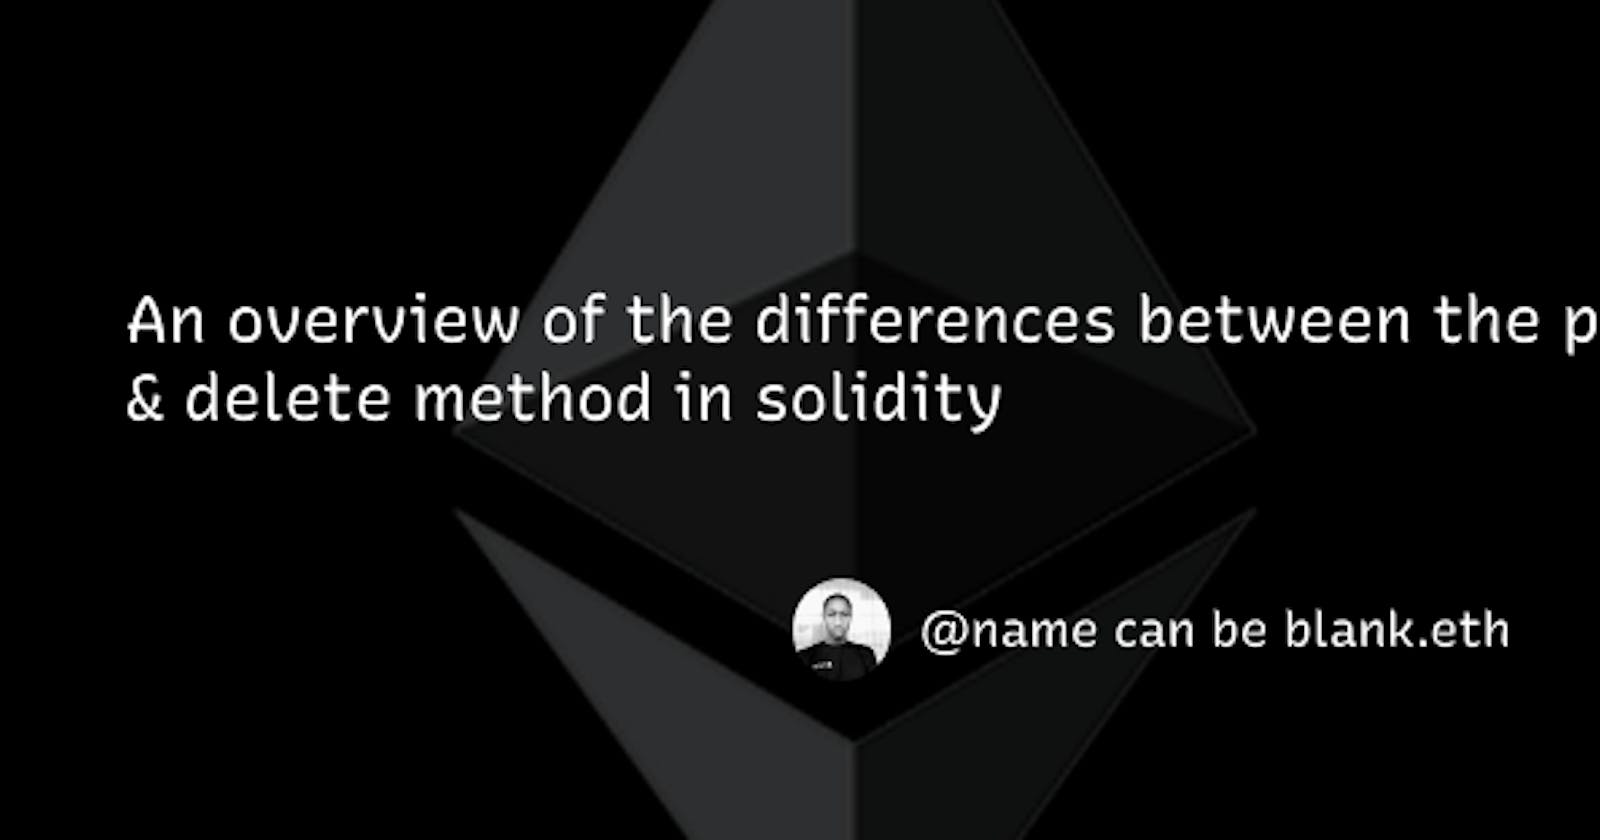 An overview of the differences between Pop & delete method in solidity